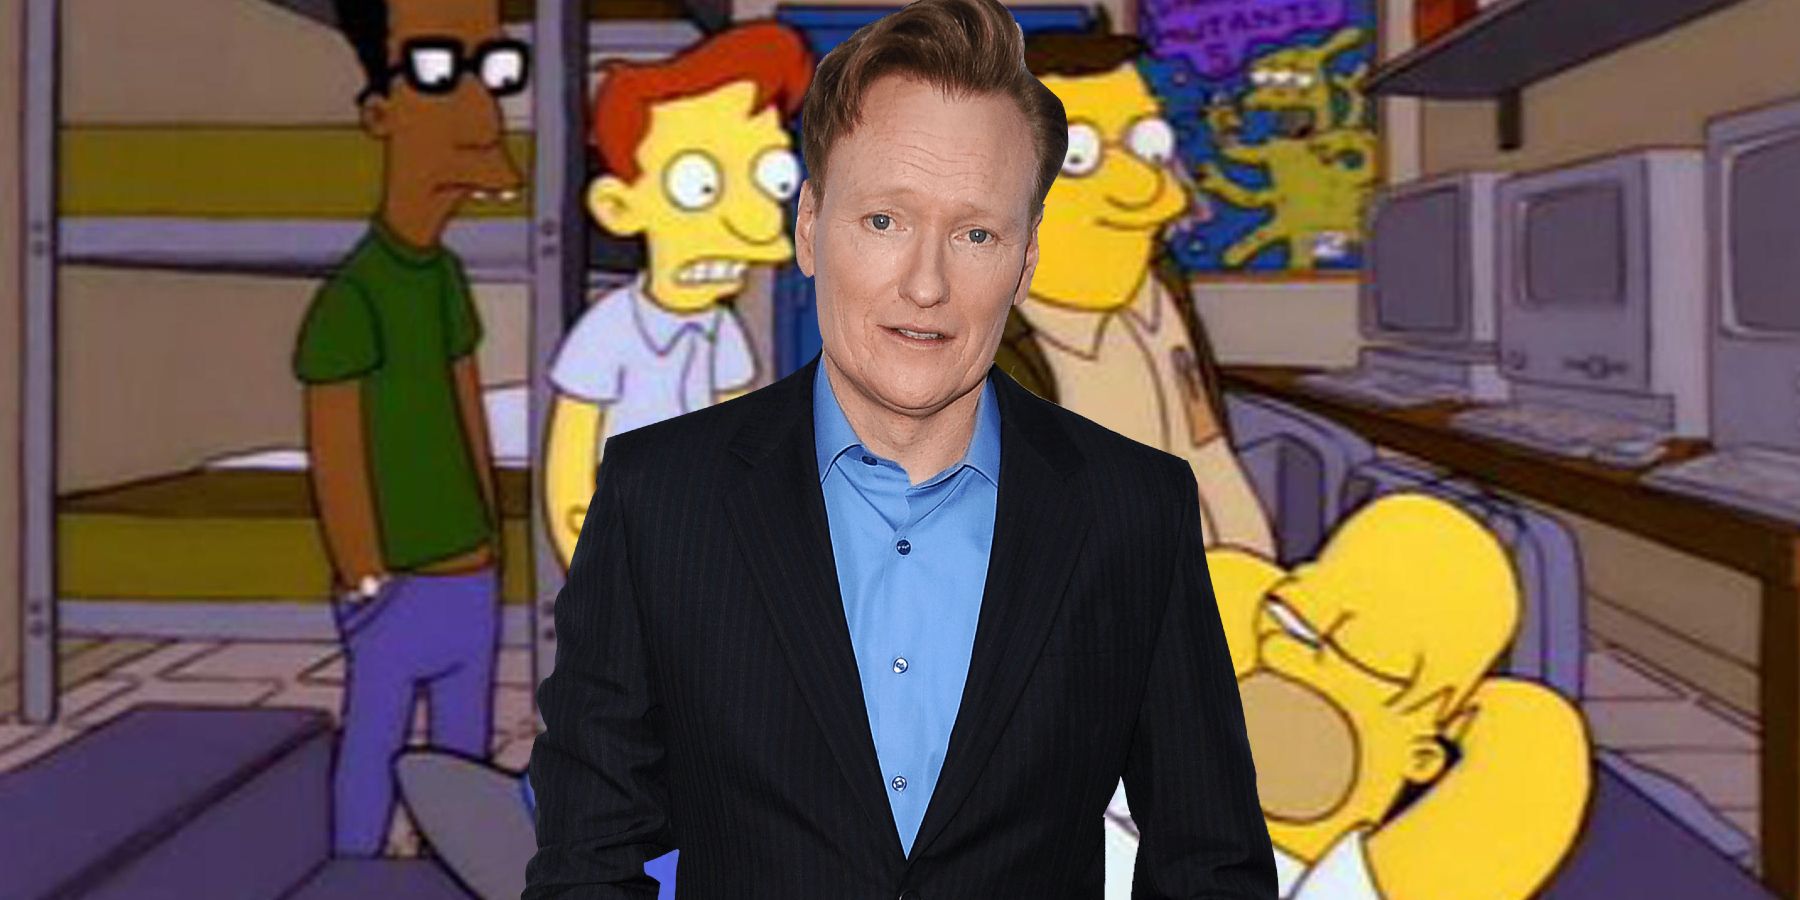 Conan O'Brien photoshopped in front of a Simpsons image of Homer's co-workers finding him sleeping